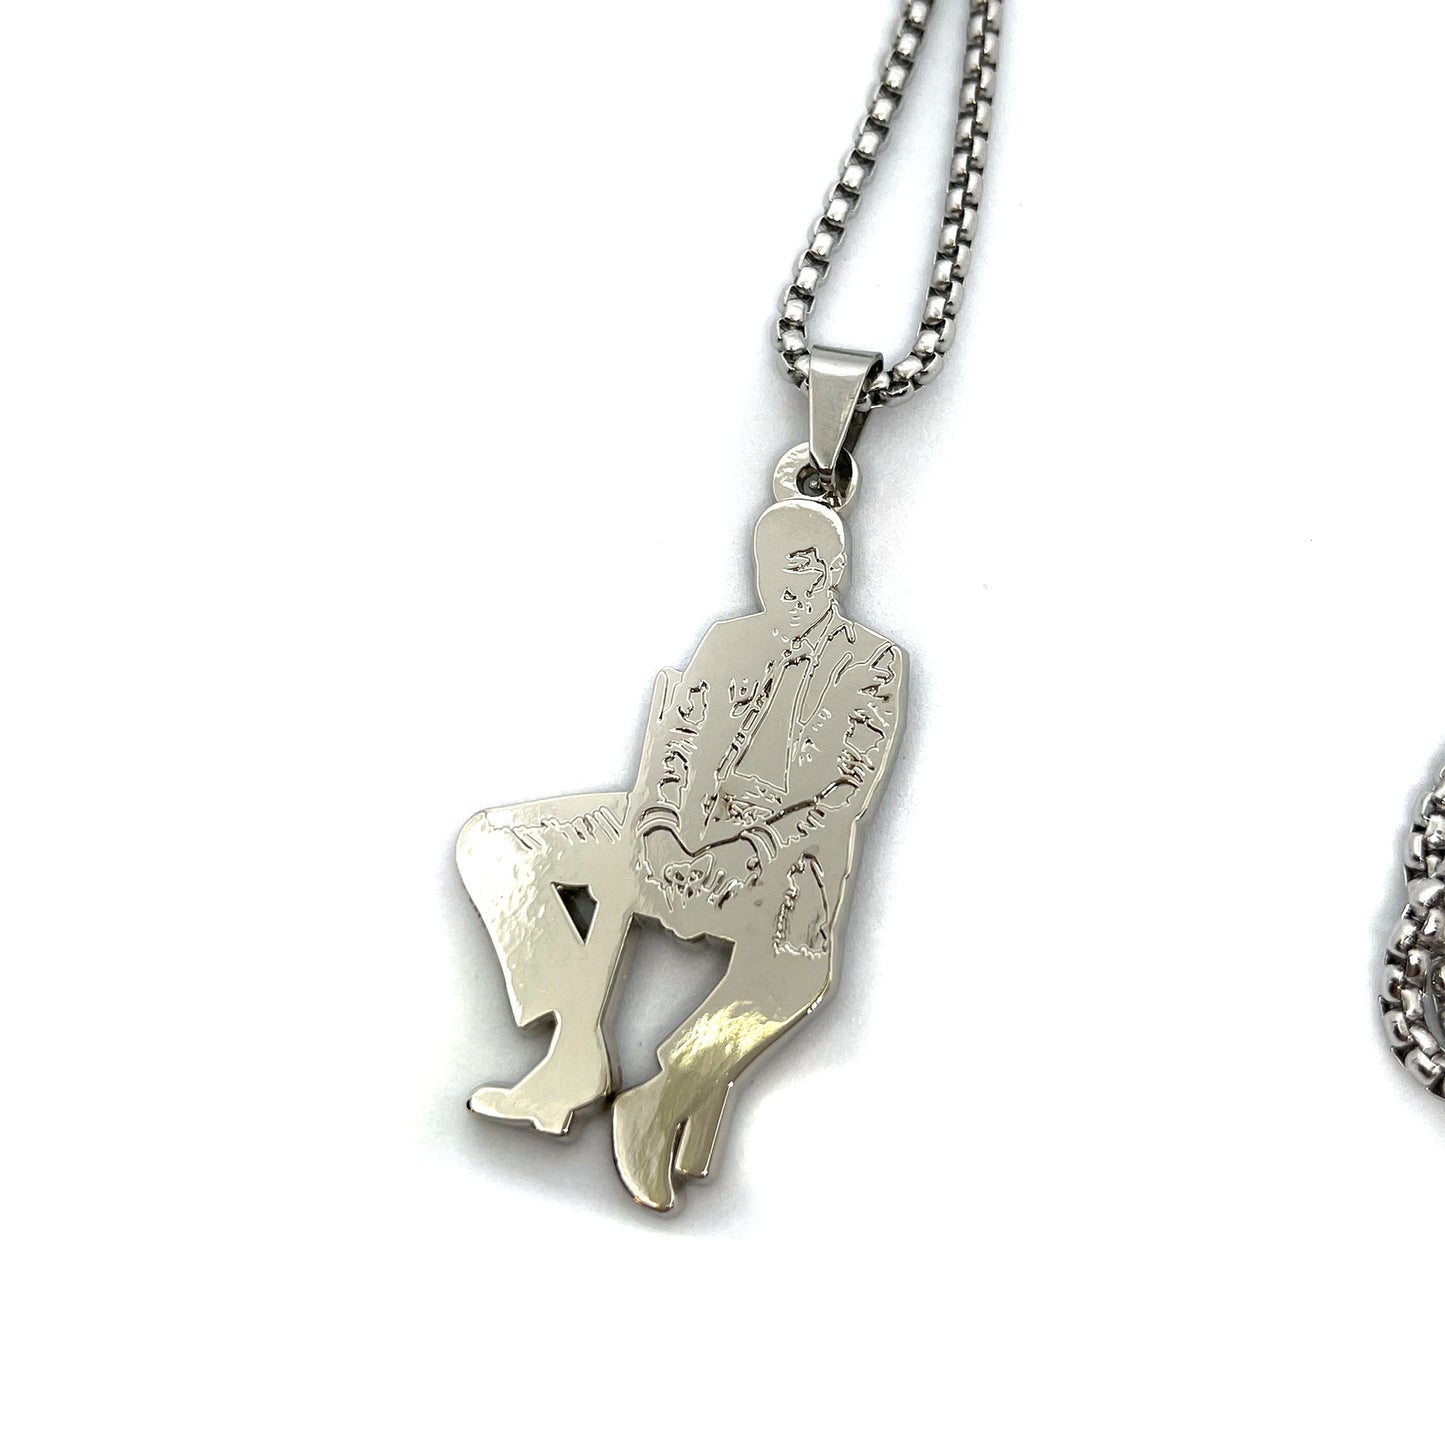 Kid Cudi Fan-Made "Man on the Moon: Mr. Rager" Pendant Chain Necklace – 60cm Stainless Steel Chain